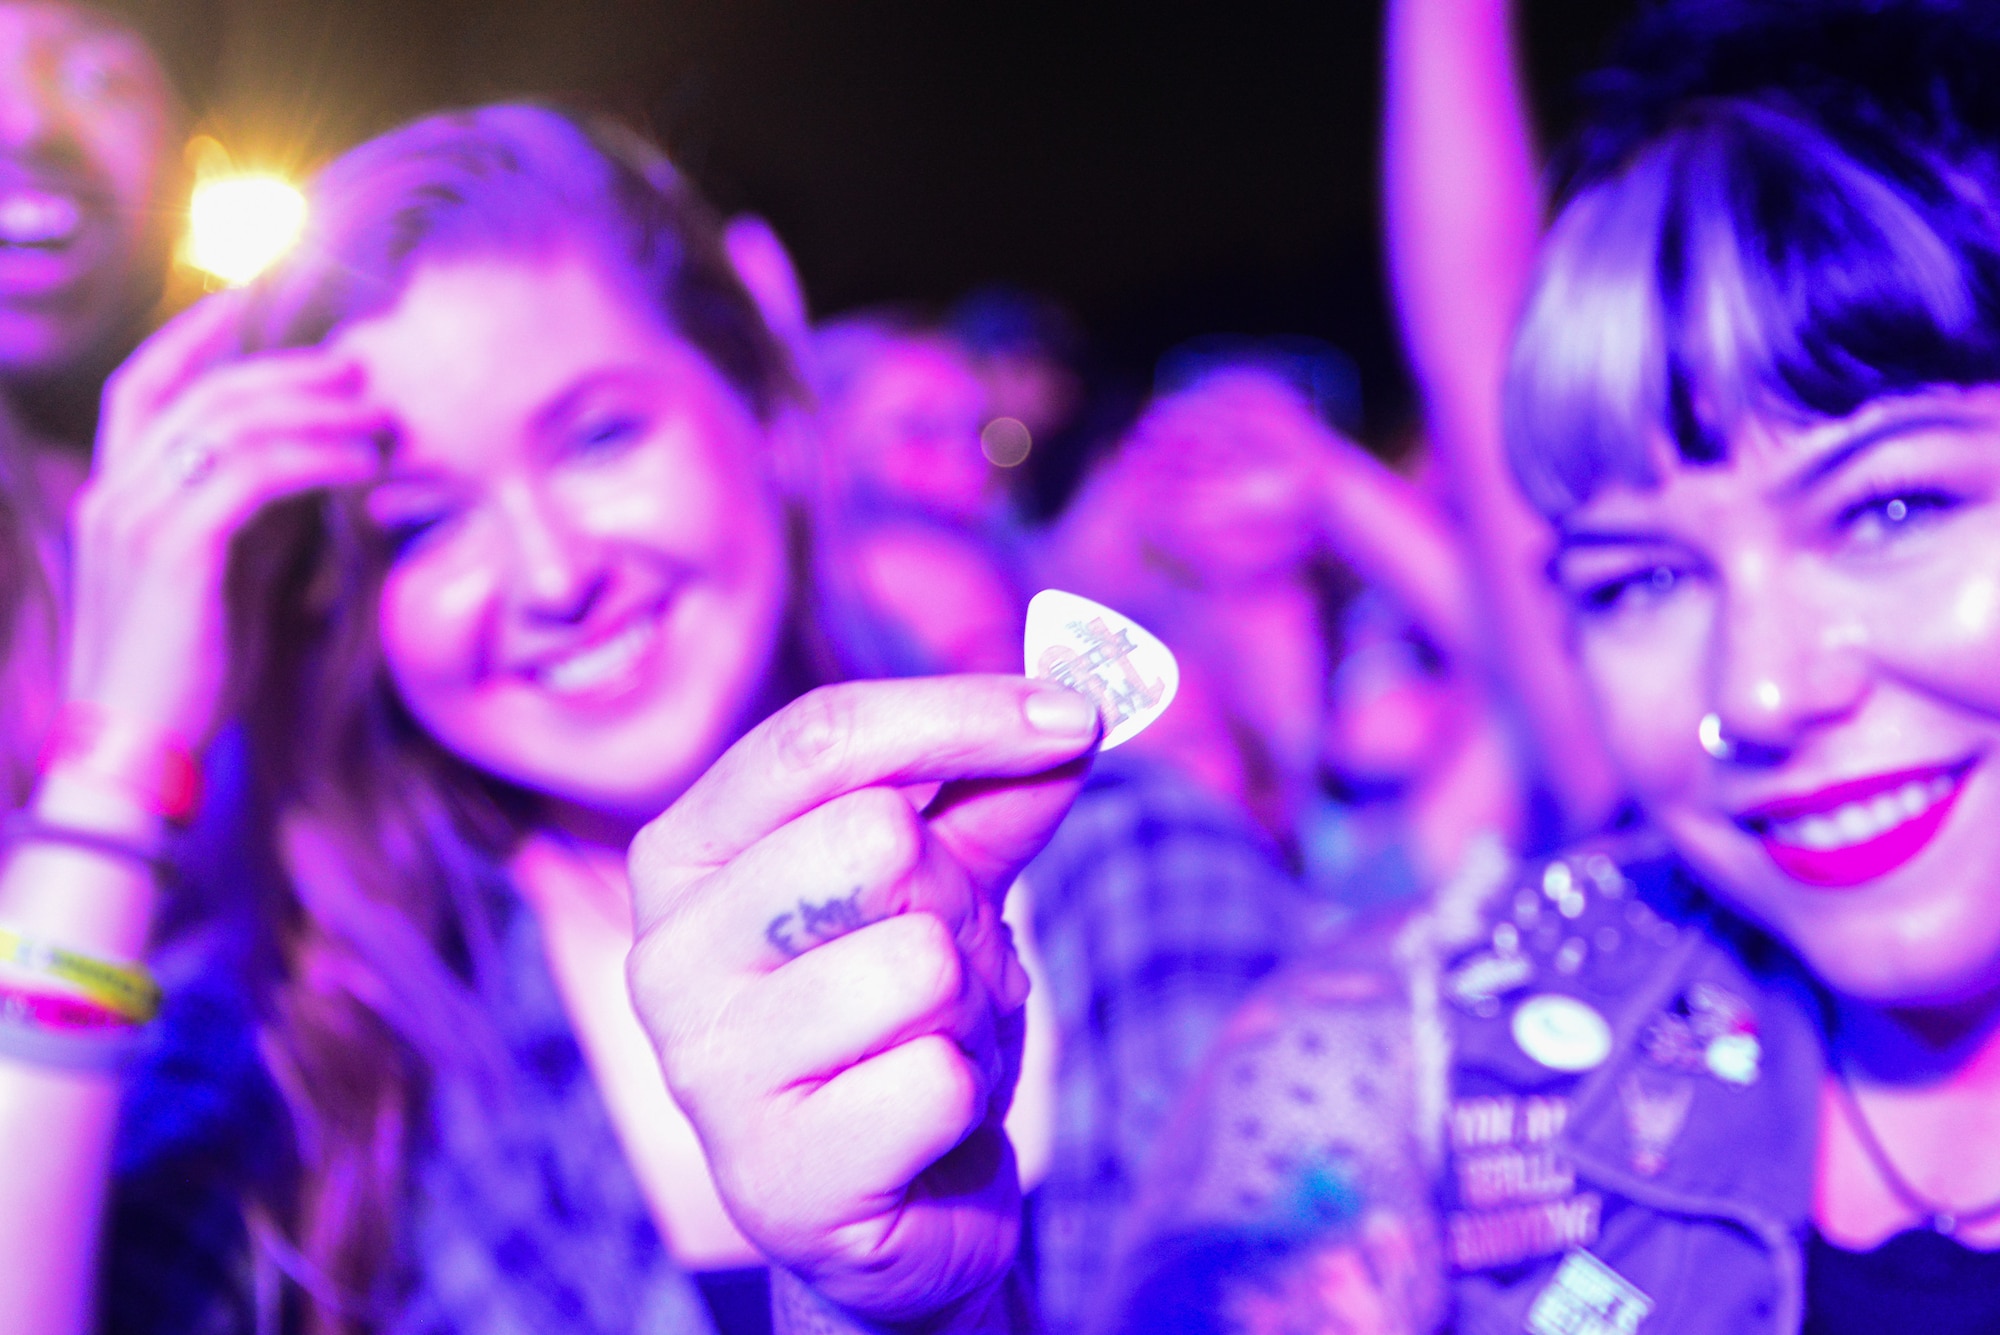 Logan Hall shows off the guitar pick she caught during the End of Summer Music Festival performance Sept. 2, 2018, at Dover Air Force Base, Del. The opportunity to host a concert involving rock bands We the Kings and X Ambassadors came through Air Force Entertainment. (U.S. Air Force photo by Airman 1st Class Dedan Dials)